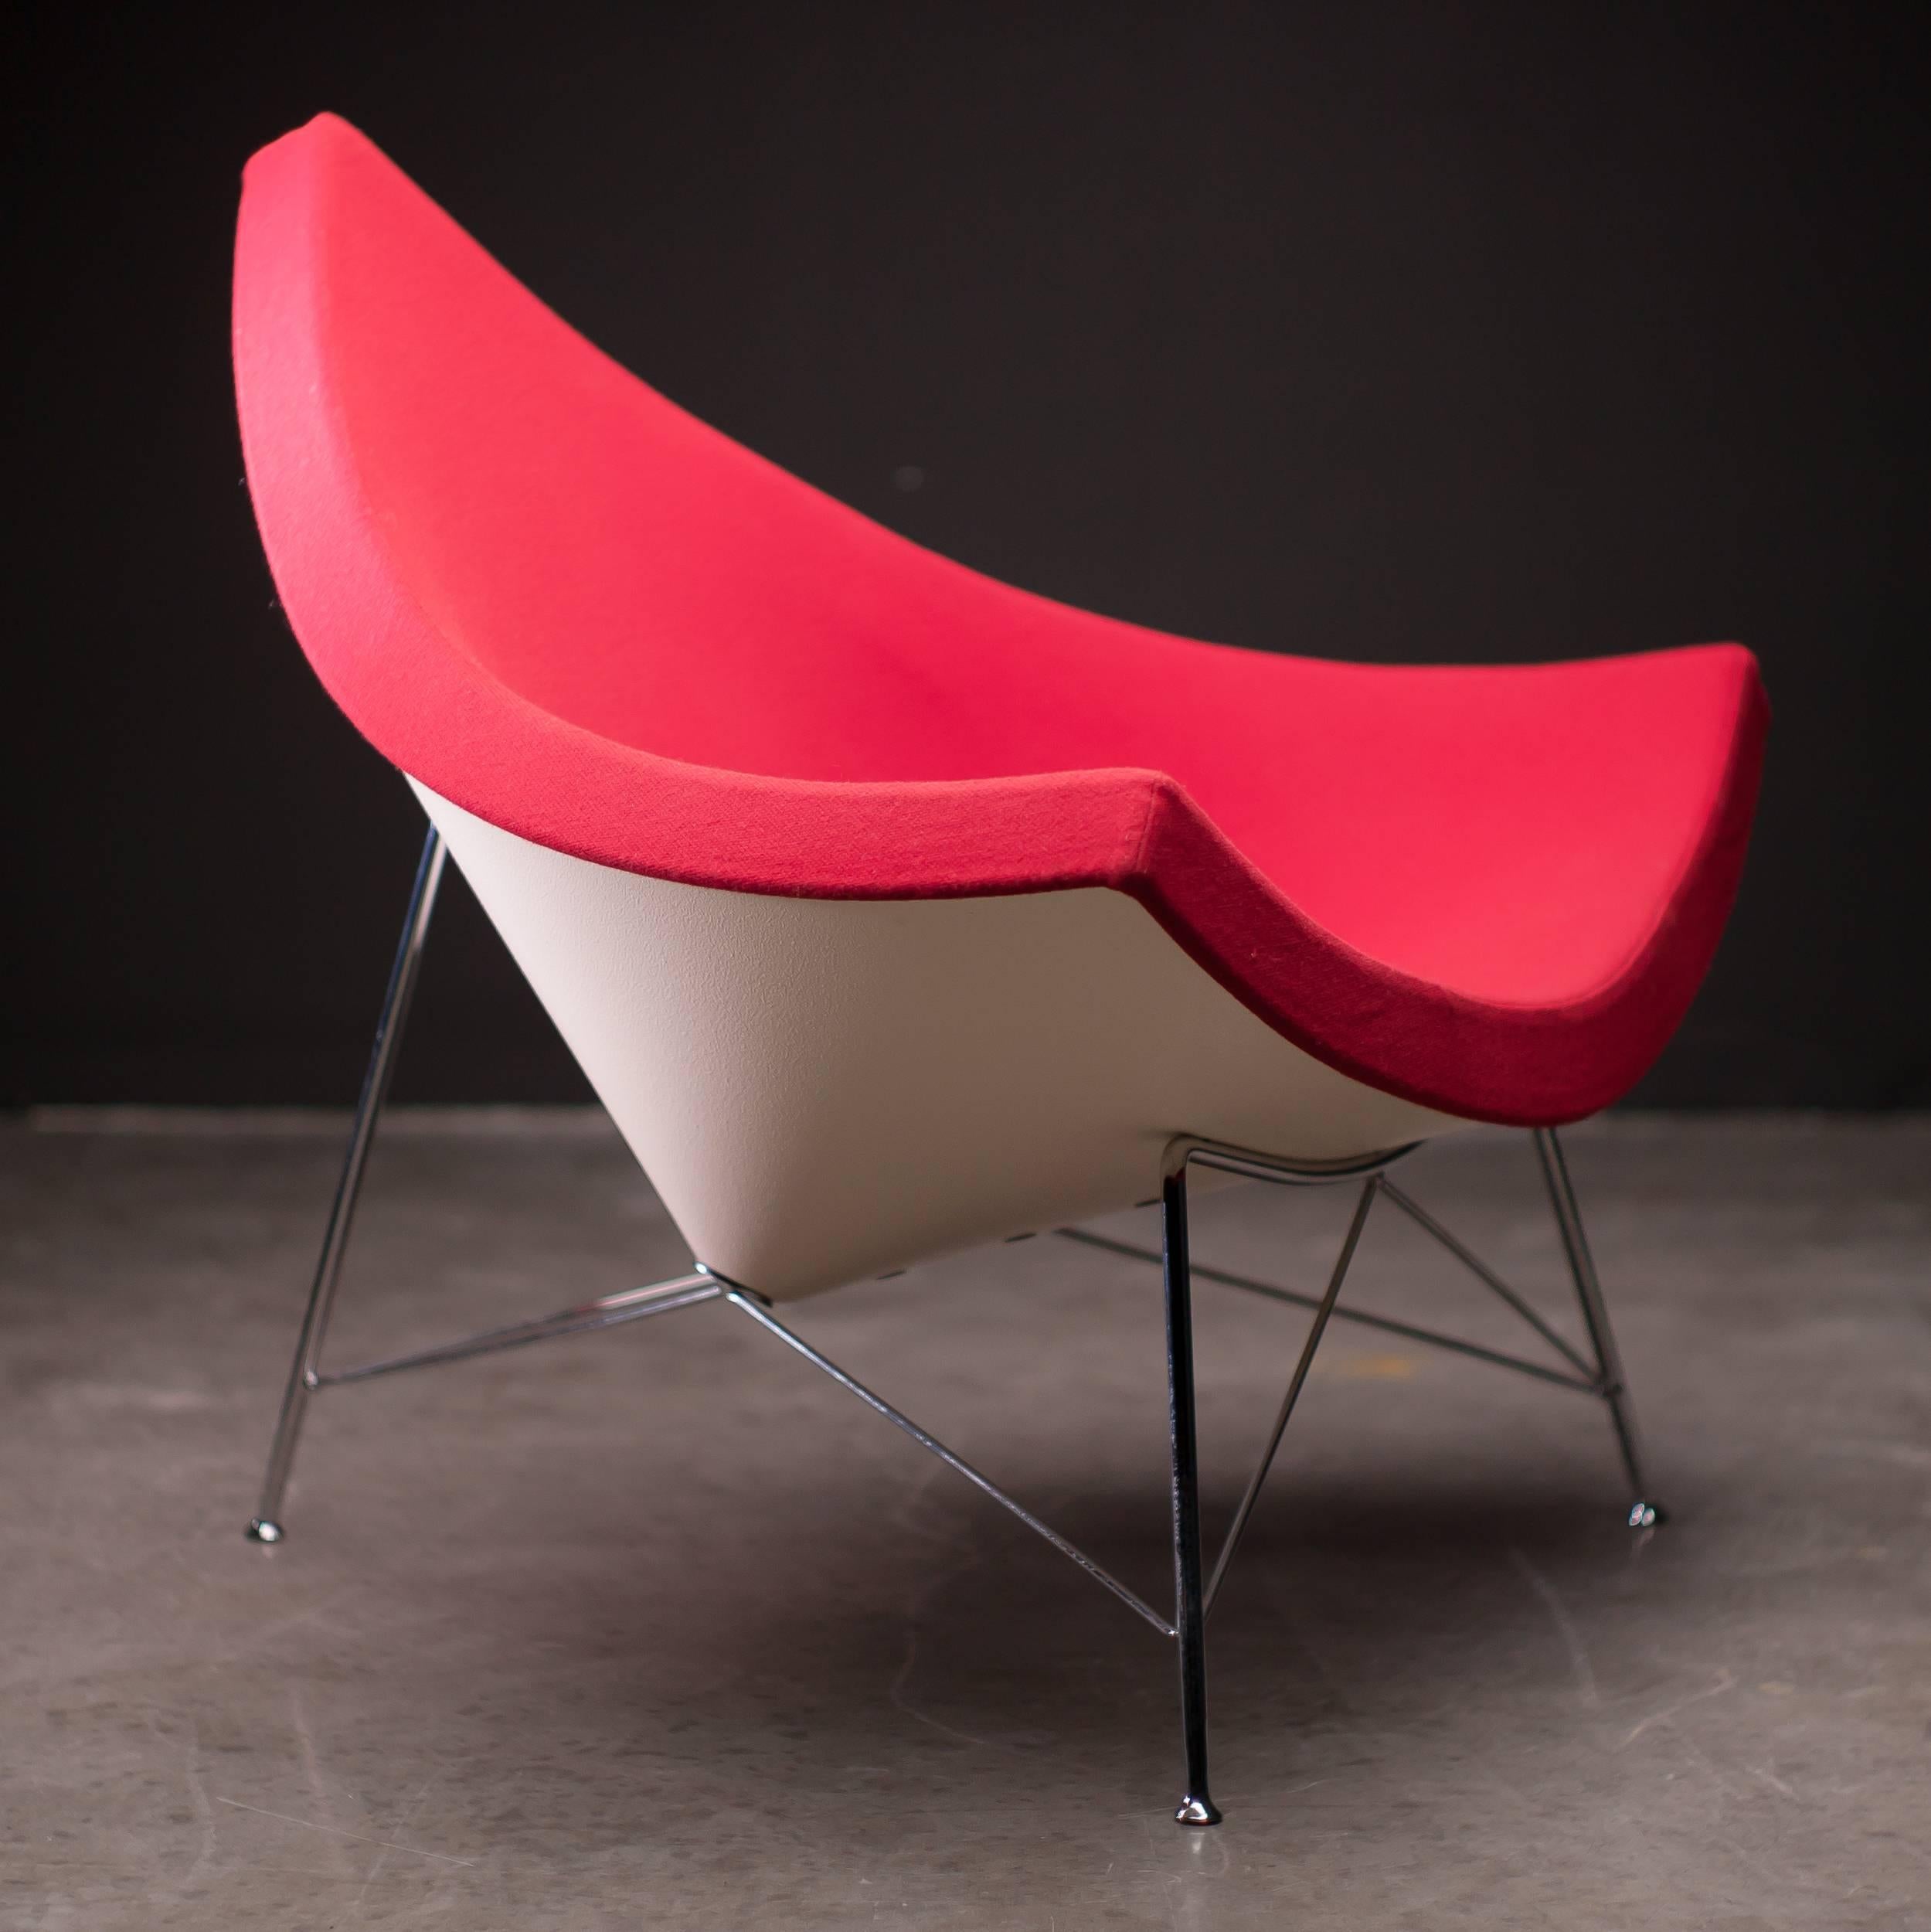 George Nelson coconut chair in red fabric, 2007 Vitra reissue.
Marked with label.

Excellent fast and affordable worldwide shipping.
White glove delivery available upon request.